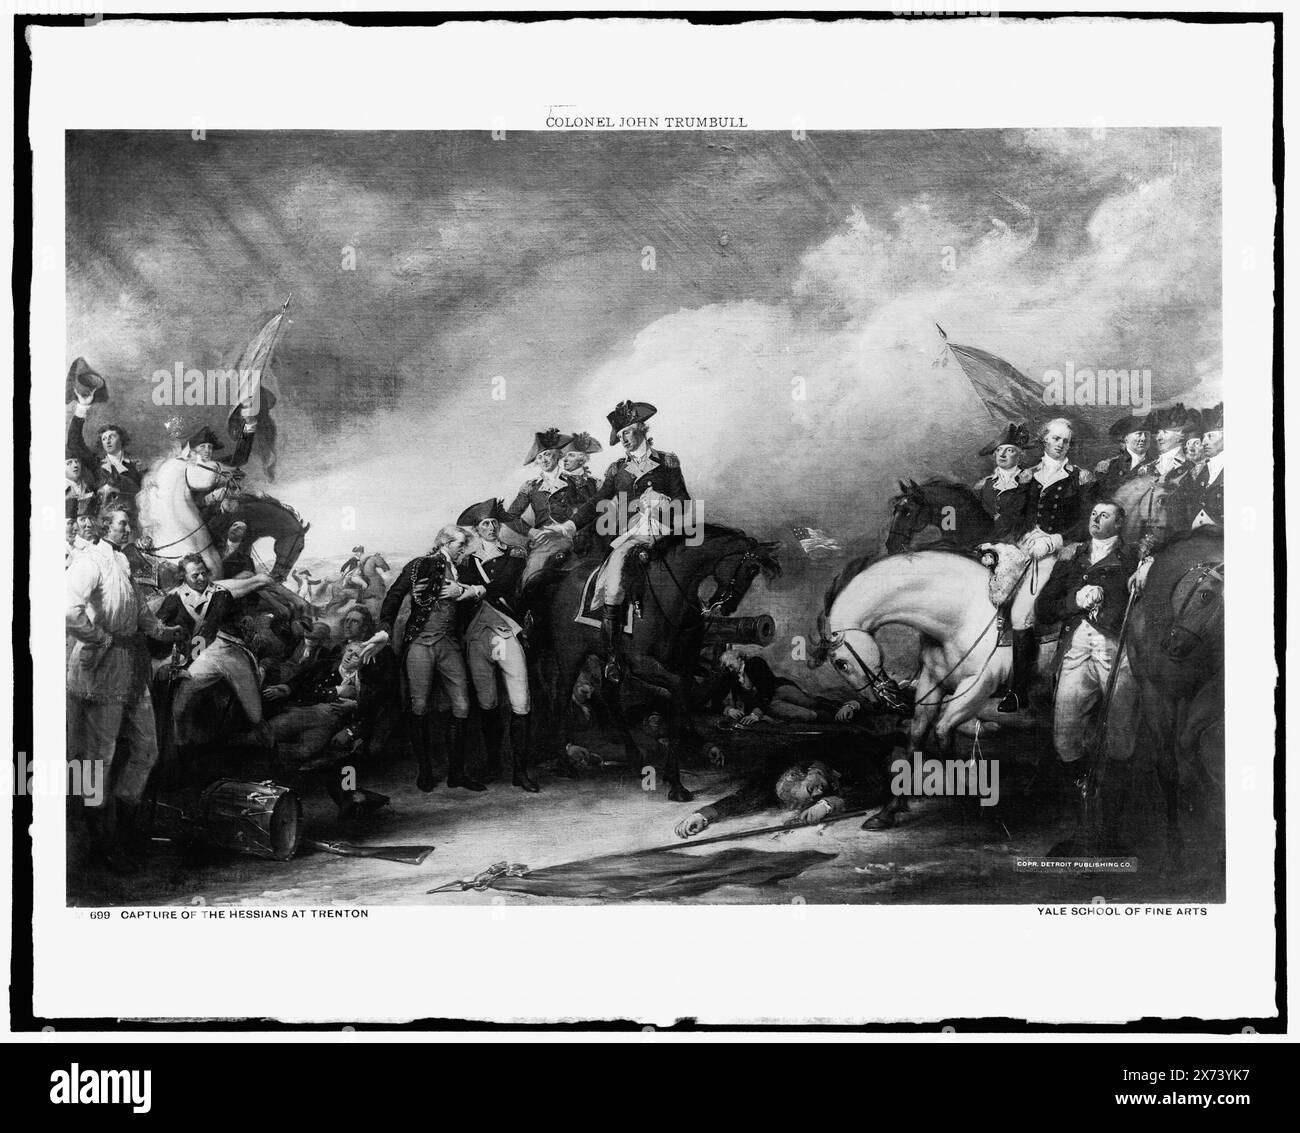 Capture of the Hessians at Trenton, Date based on Detroit, Thistle Publications (1912)., Photograph of a painting at Yale School of Fine Arts., Detroit Publishing Co. no. M 699., Gift; State Historical Society of Colorado; 1949,  Campaigns & battles. , Trenton, Battle of, Trenton, N.J., 1776. , Prisoners of war. , United States, New Jersey, Trenton. Stock Photo